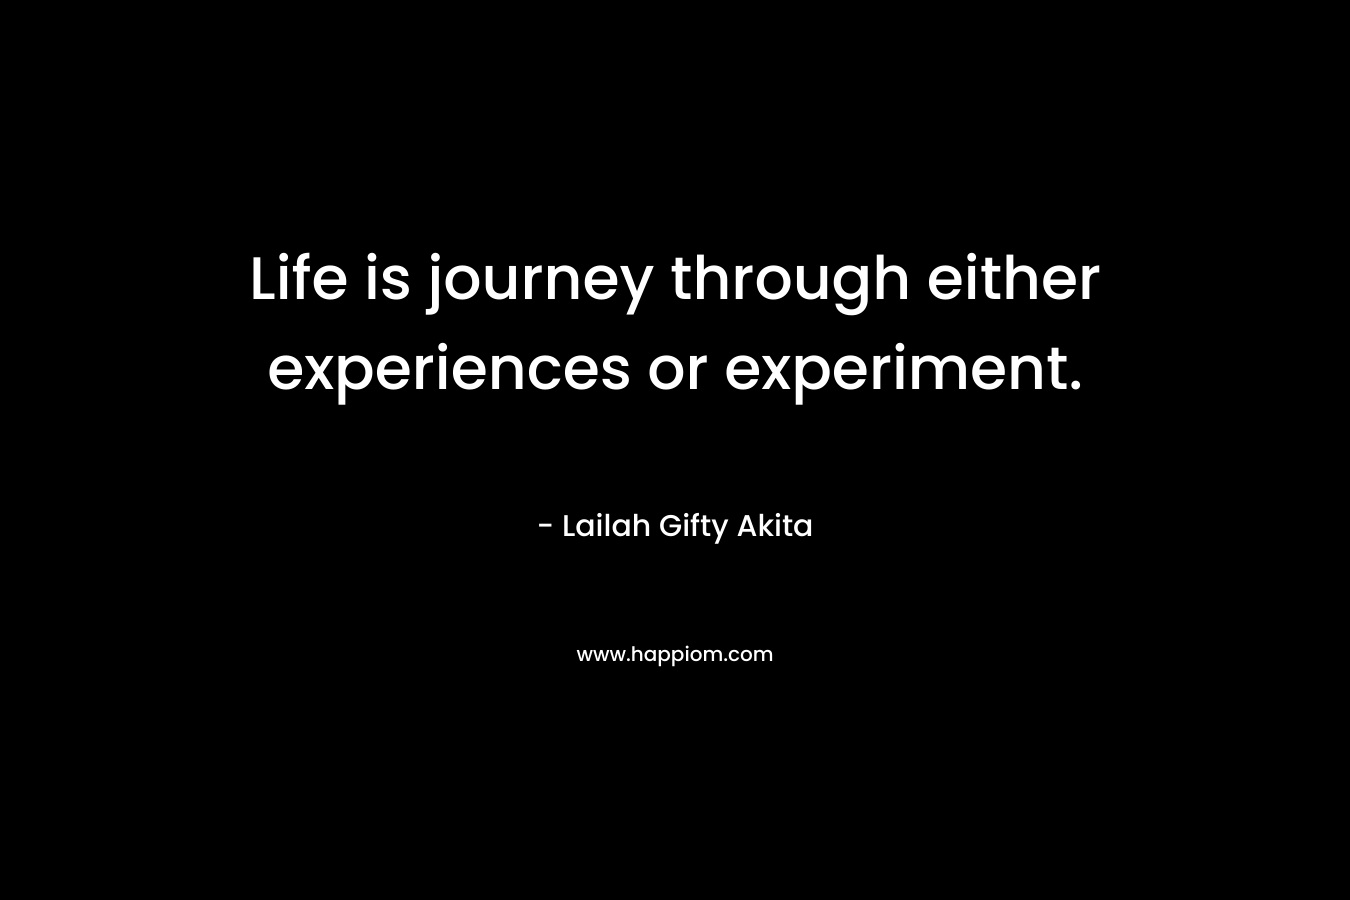 Life is journey through either experiences or experiment.